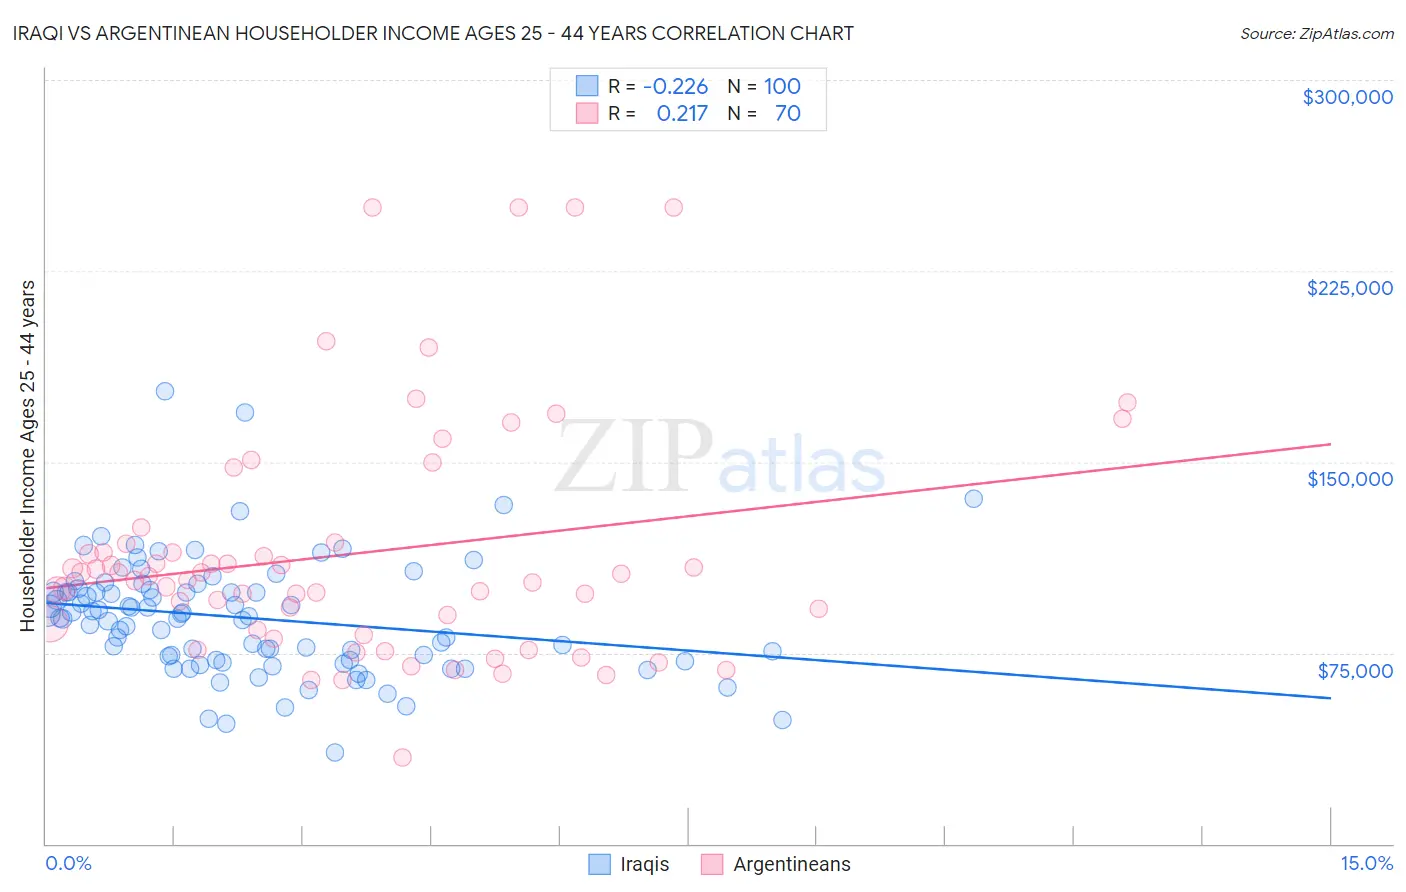 Iraqi vs Argentinean Householder Income Ages 25 - 44 years